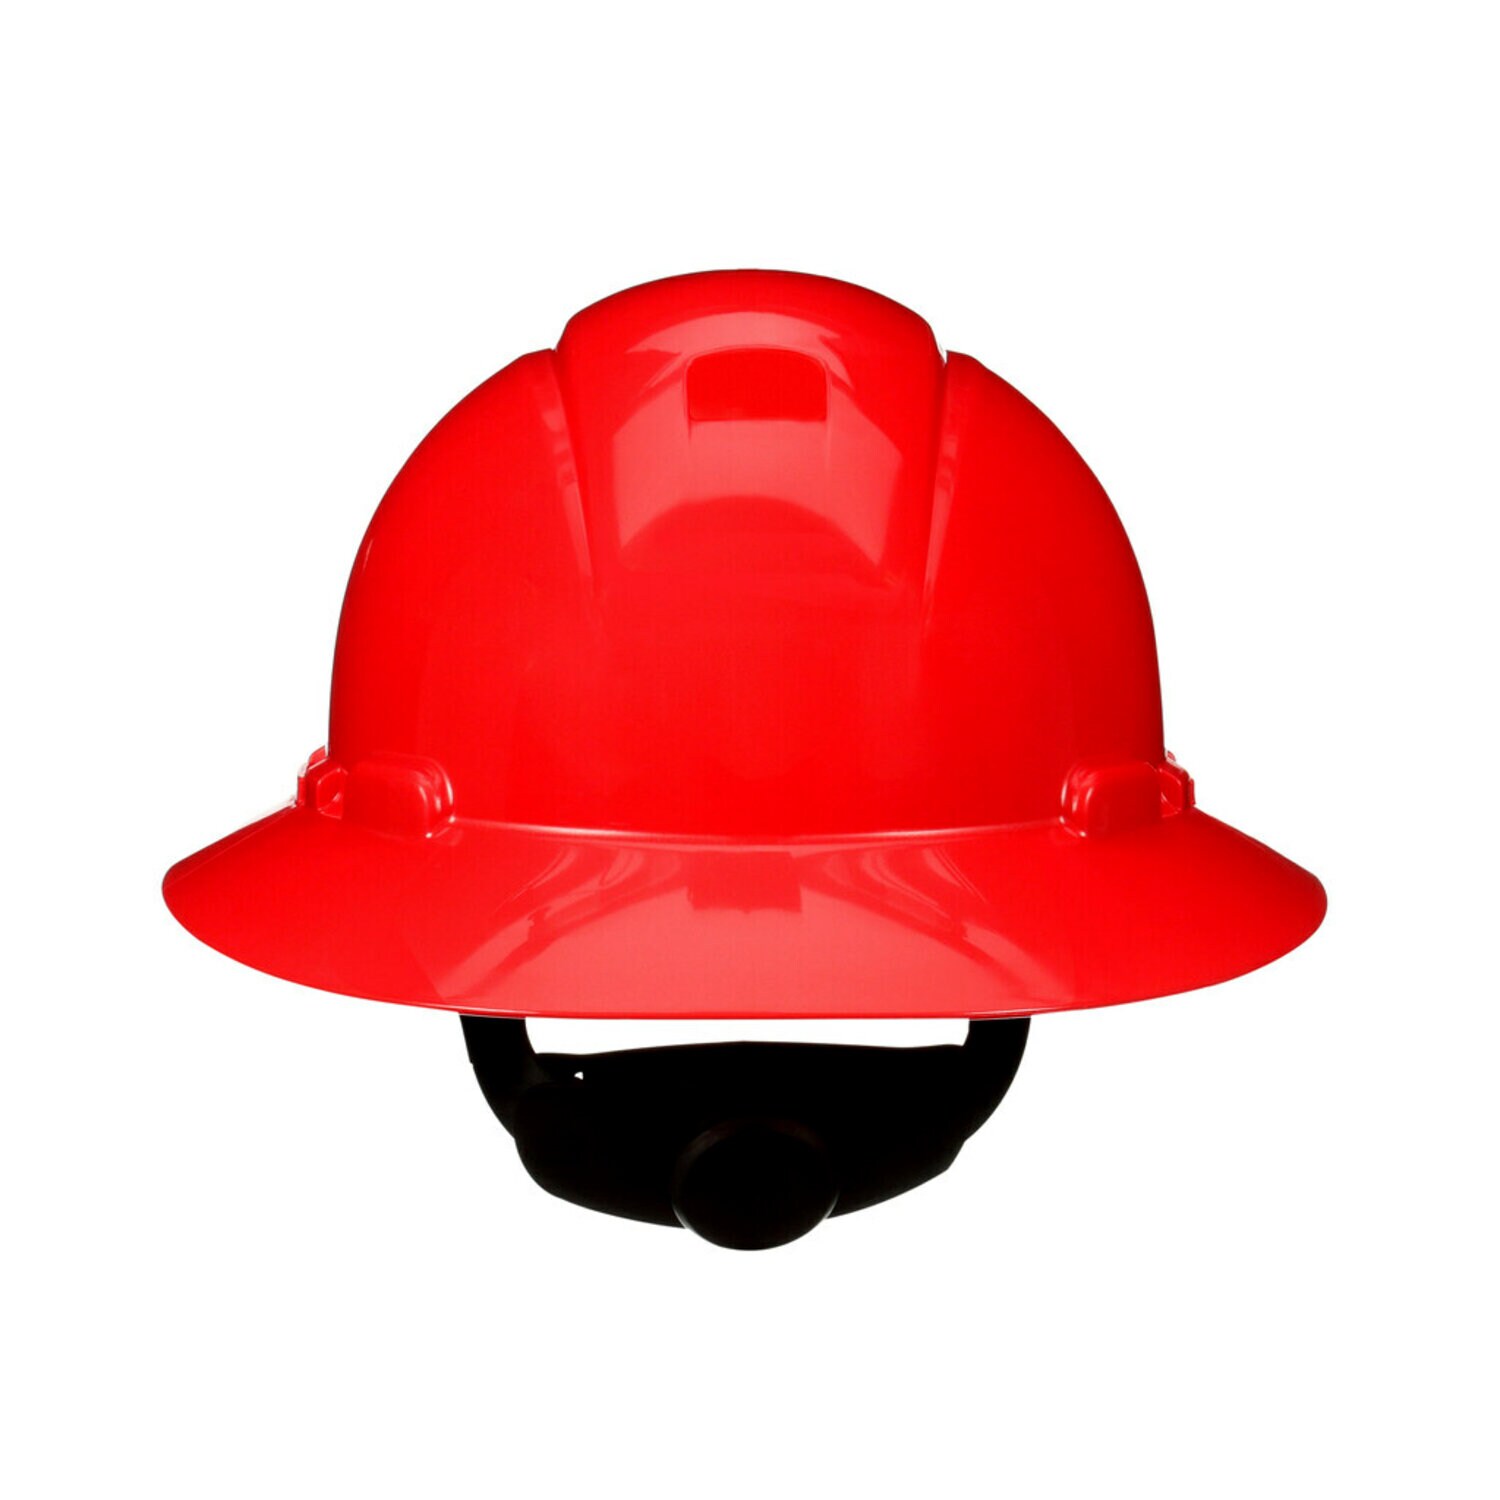 7100240013 - 3M SecureFit Full Brim Hard Hat H-805SFR-UV, Red 4-Point Pressure Diffusion Ratchet Suspension, with Uvicator, 20 ea/Case